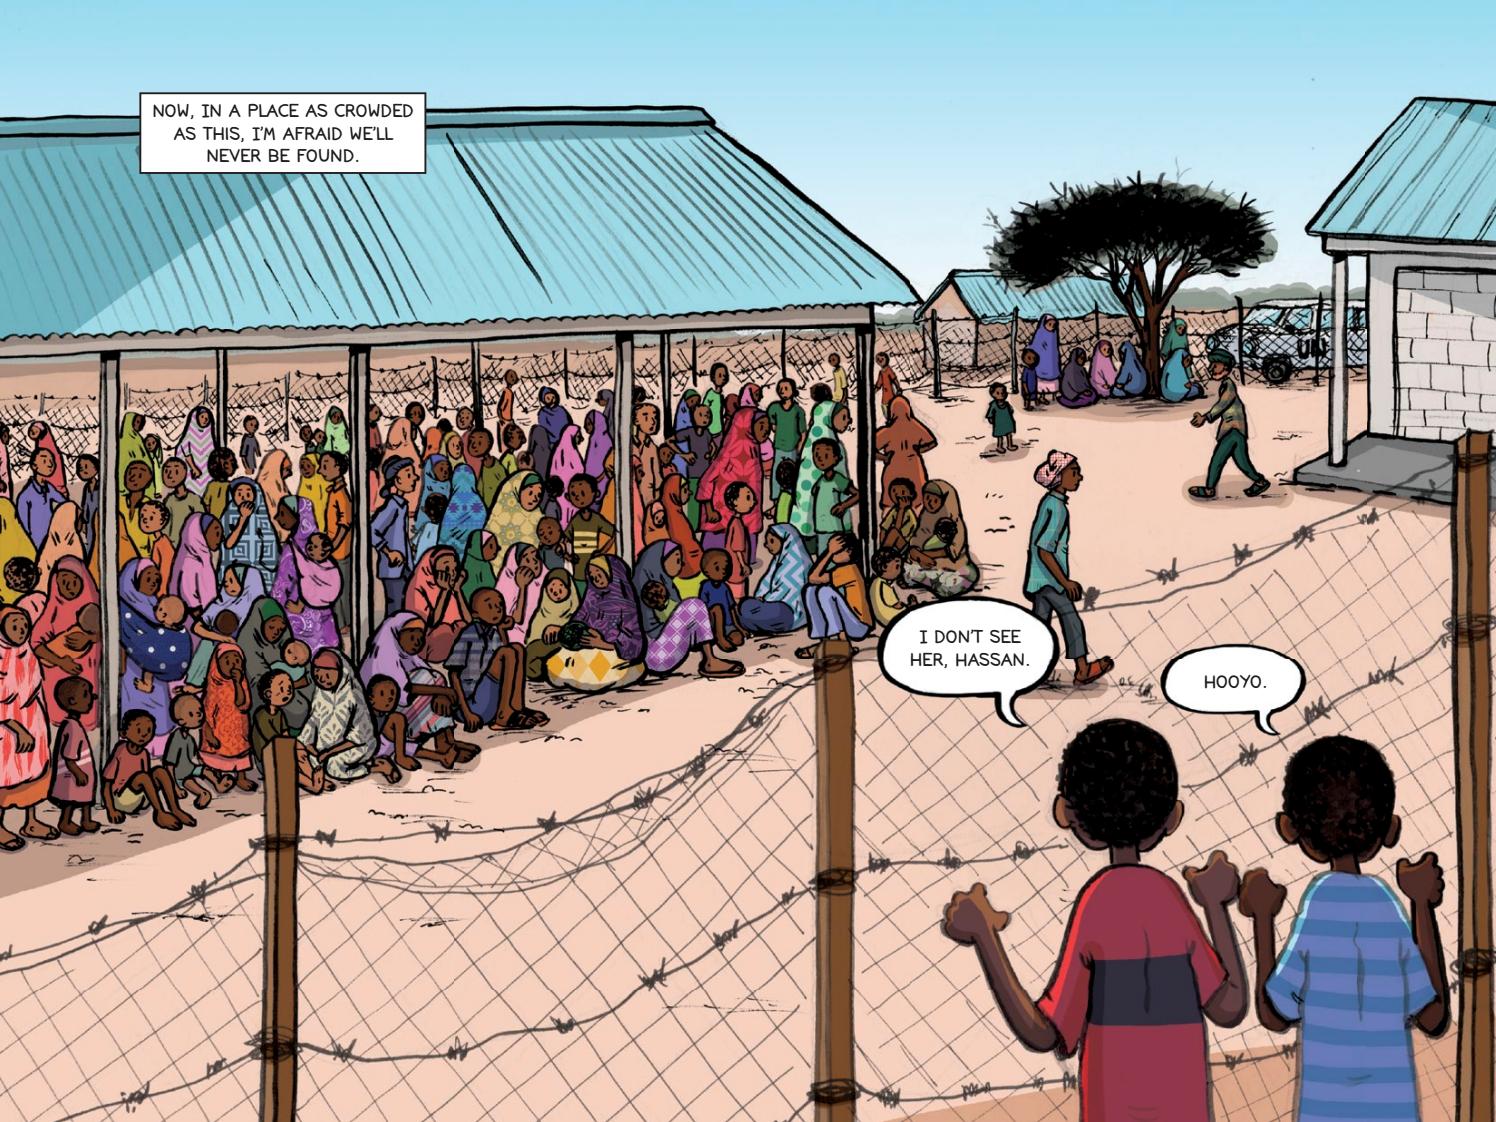 2-page illustration of a refugee camp with children looking through a chainlink fence